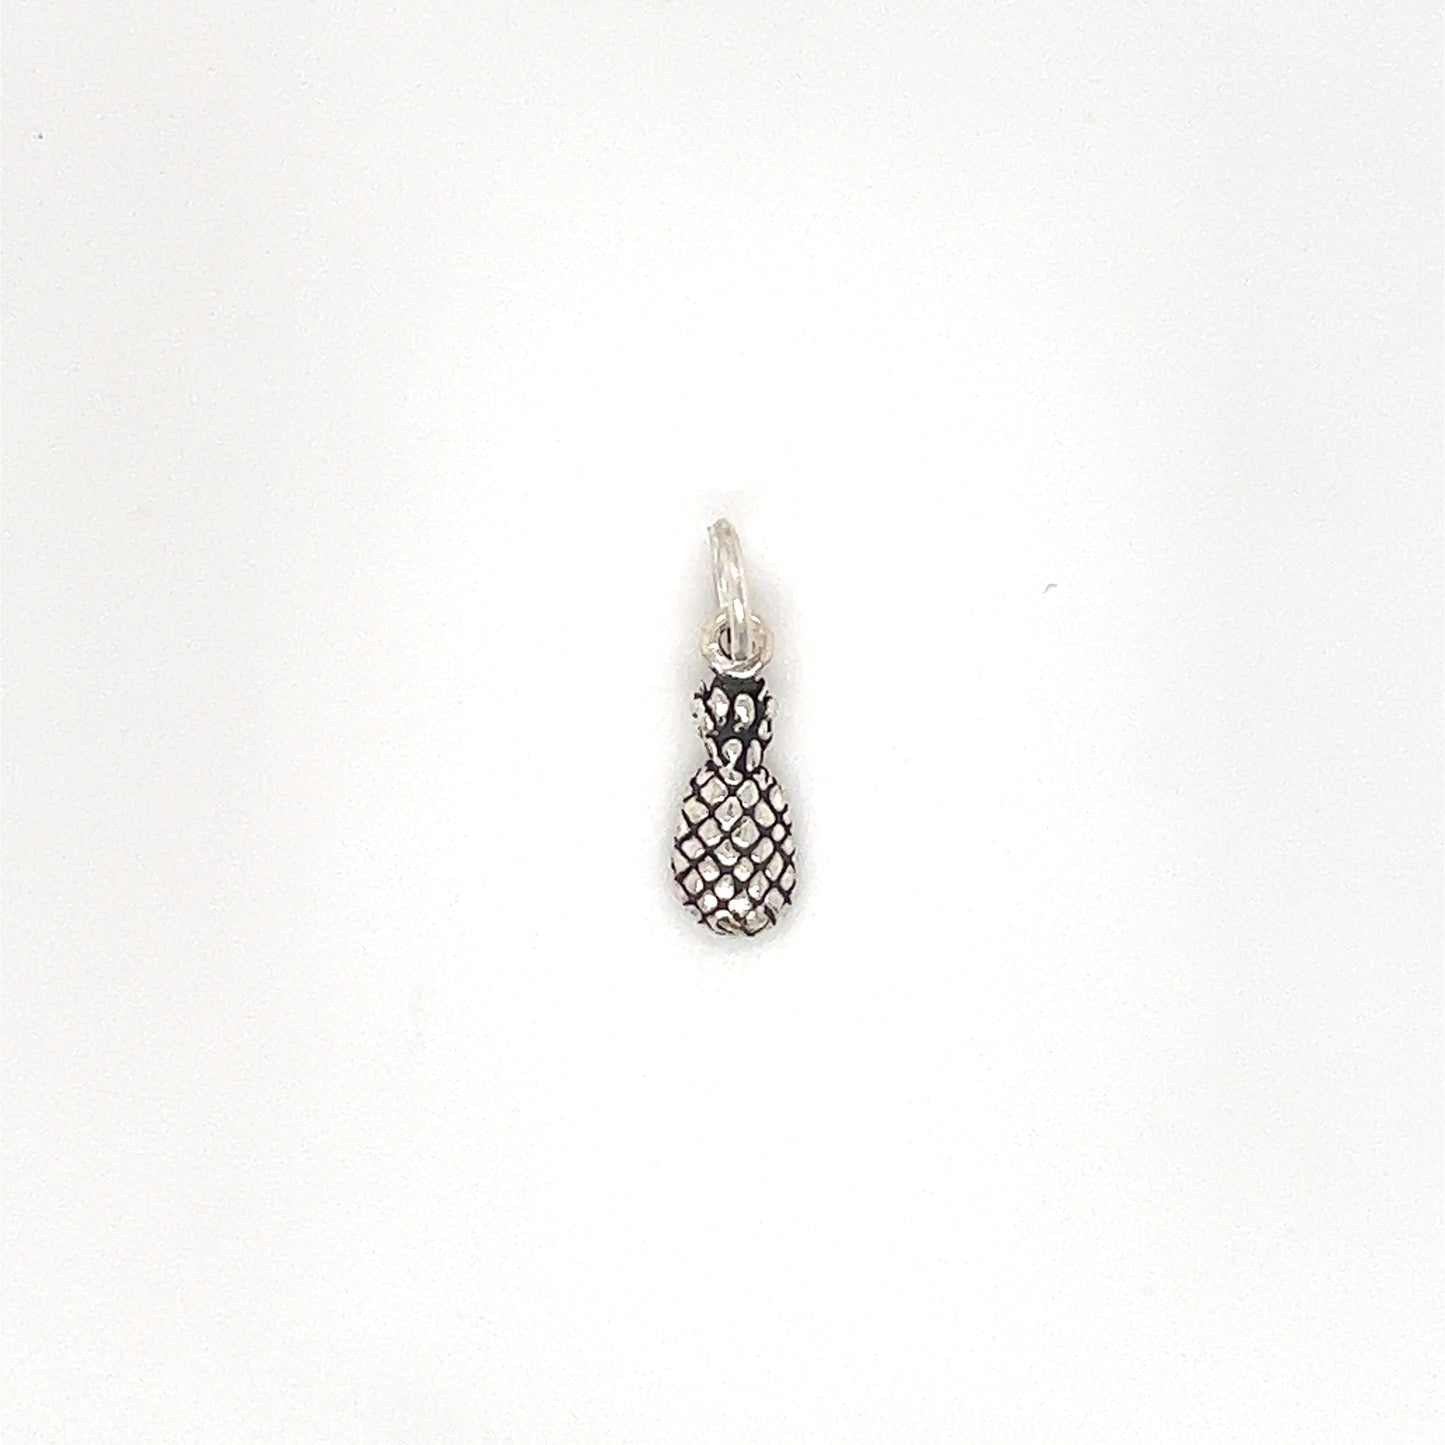 A Super Silver Tiny Pineapple Charm on a white background.